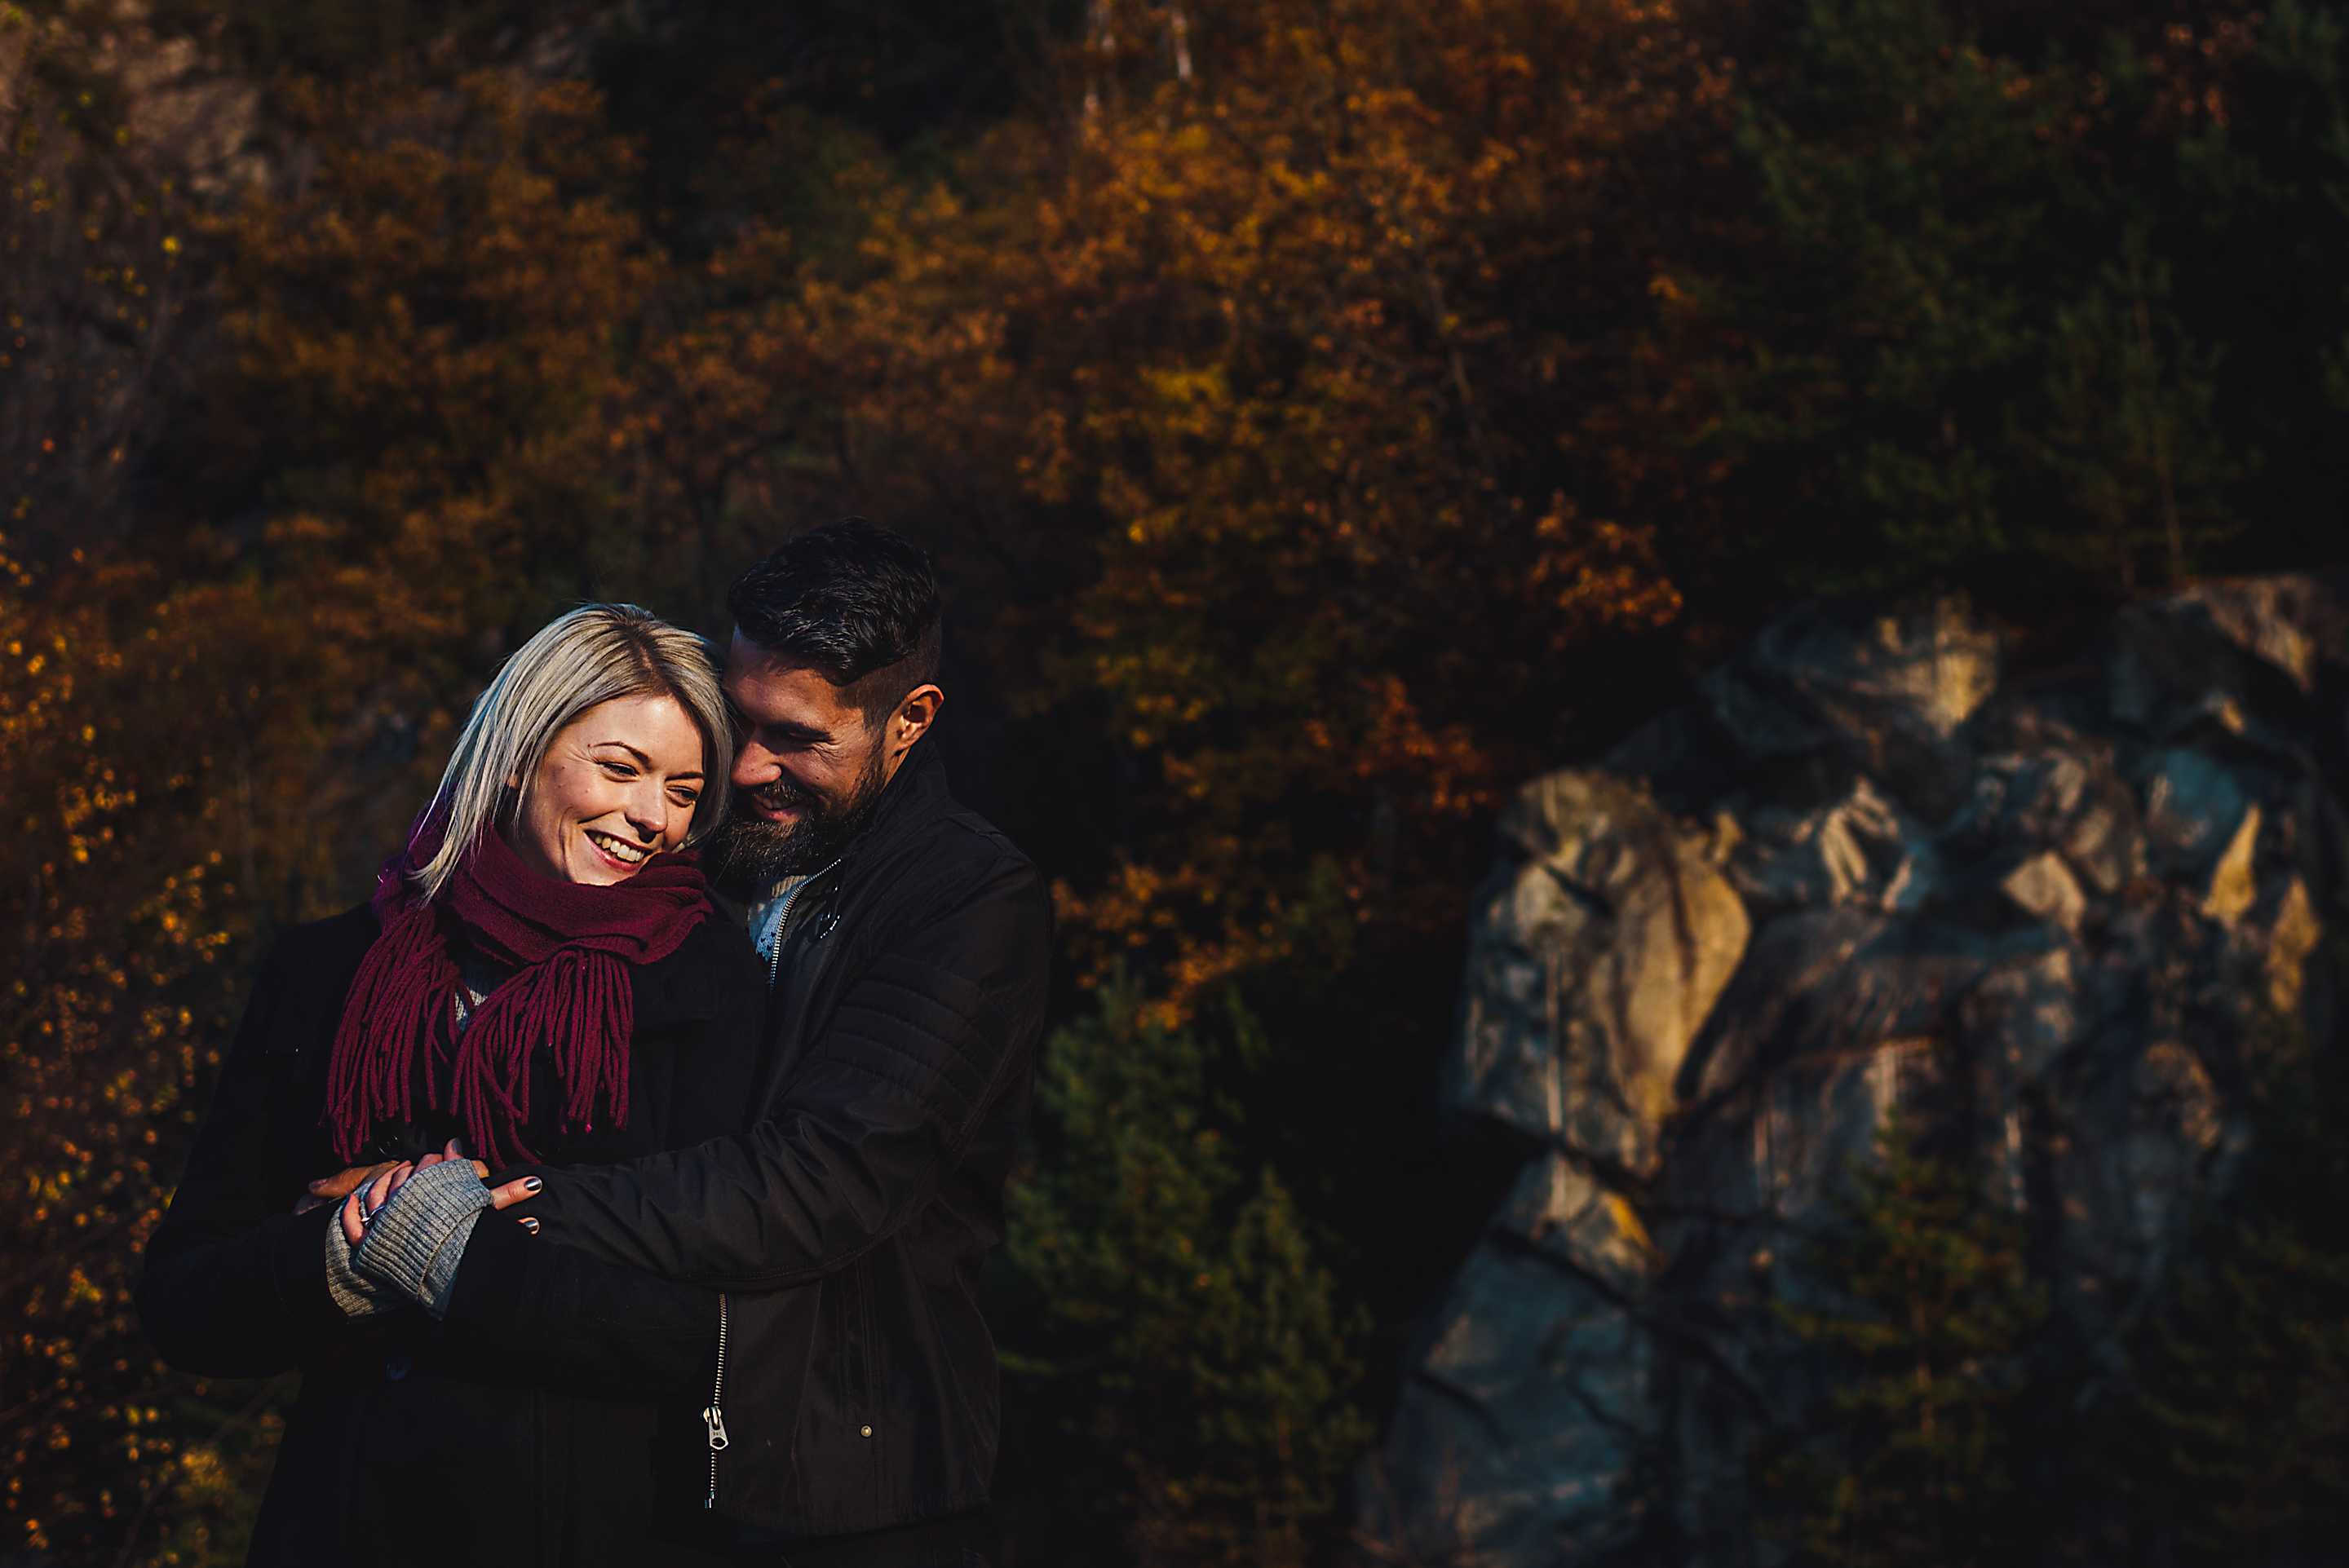 Wedding photography workshops in Norway